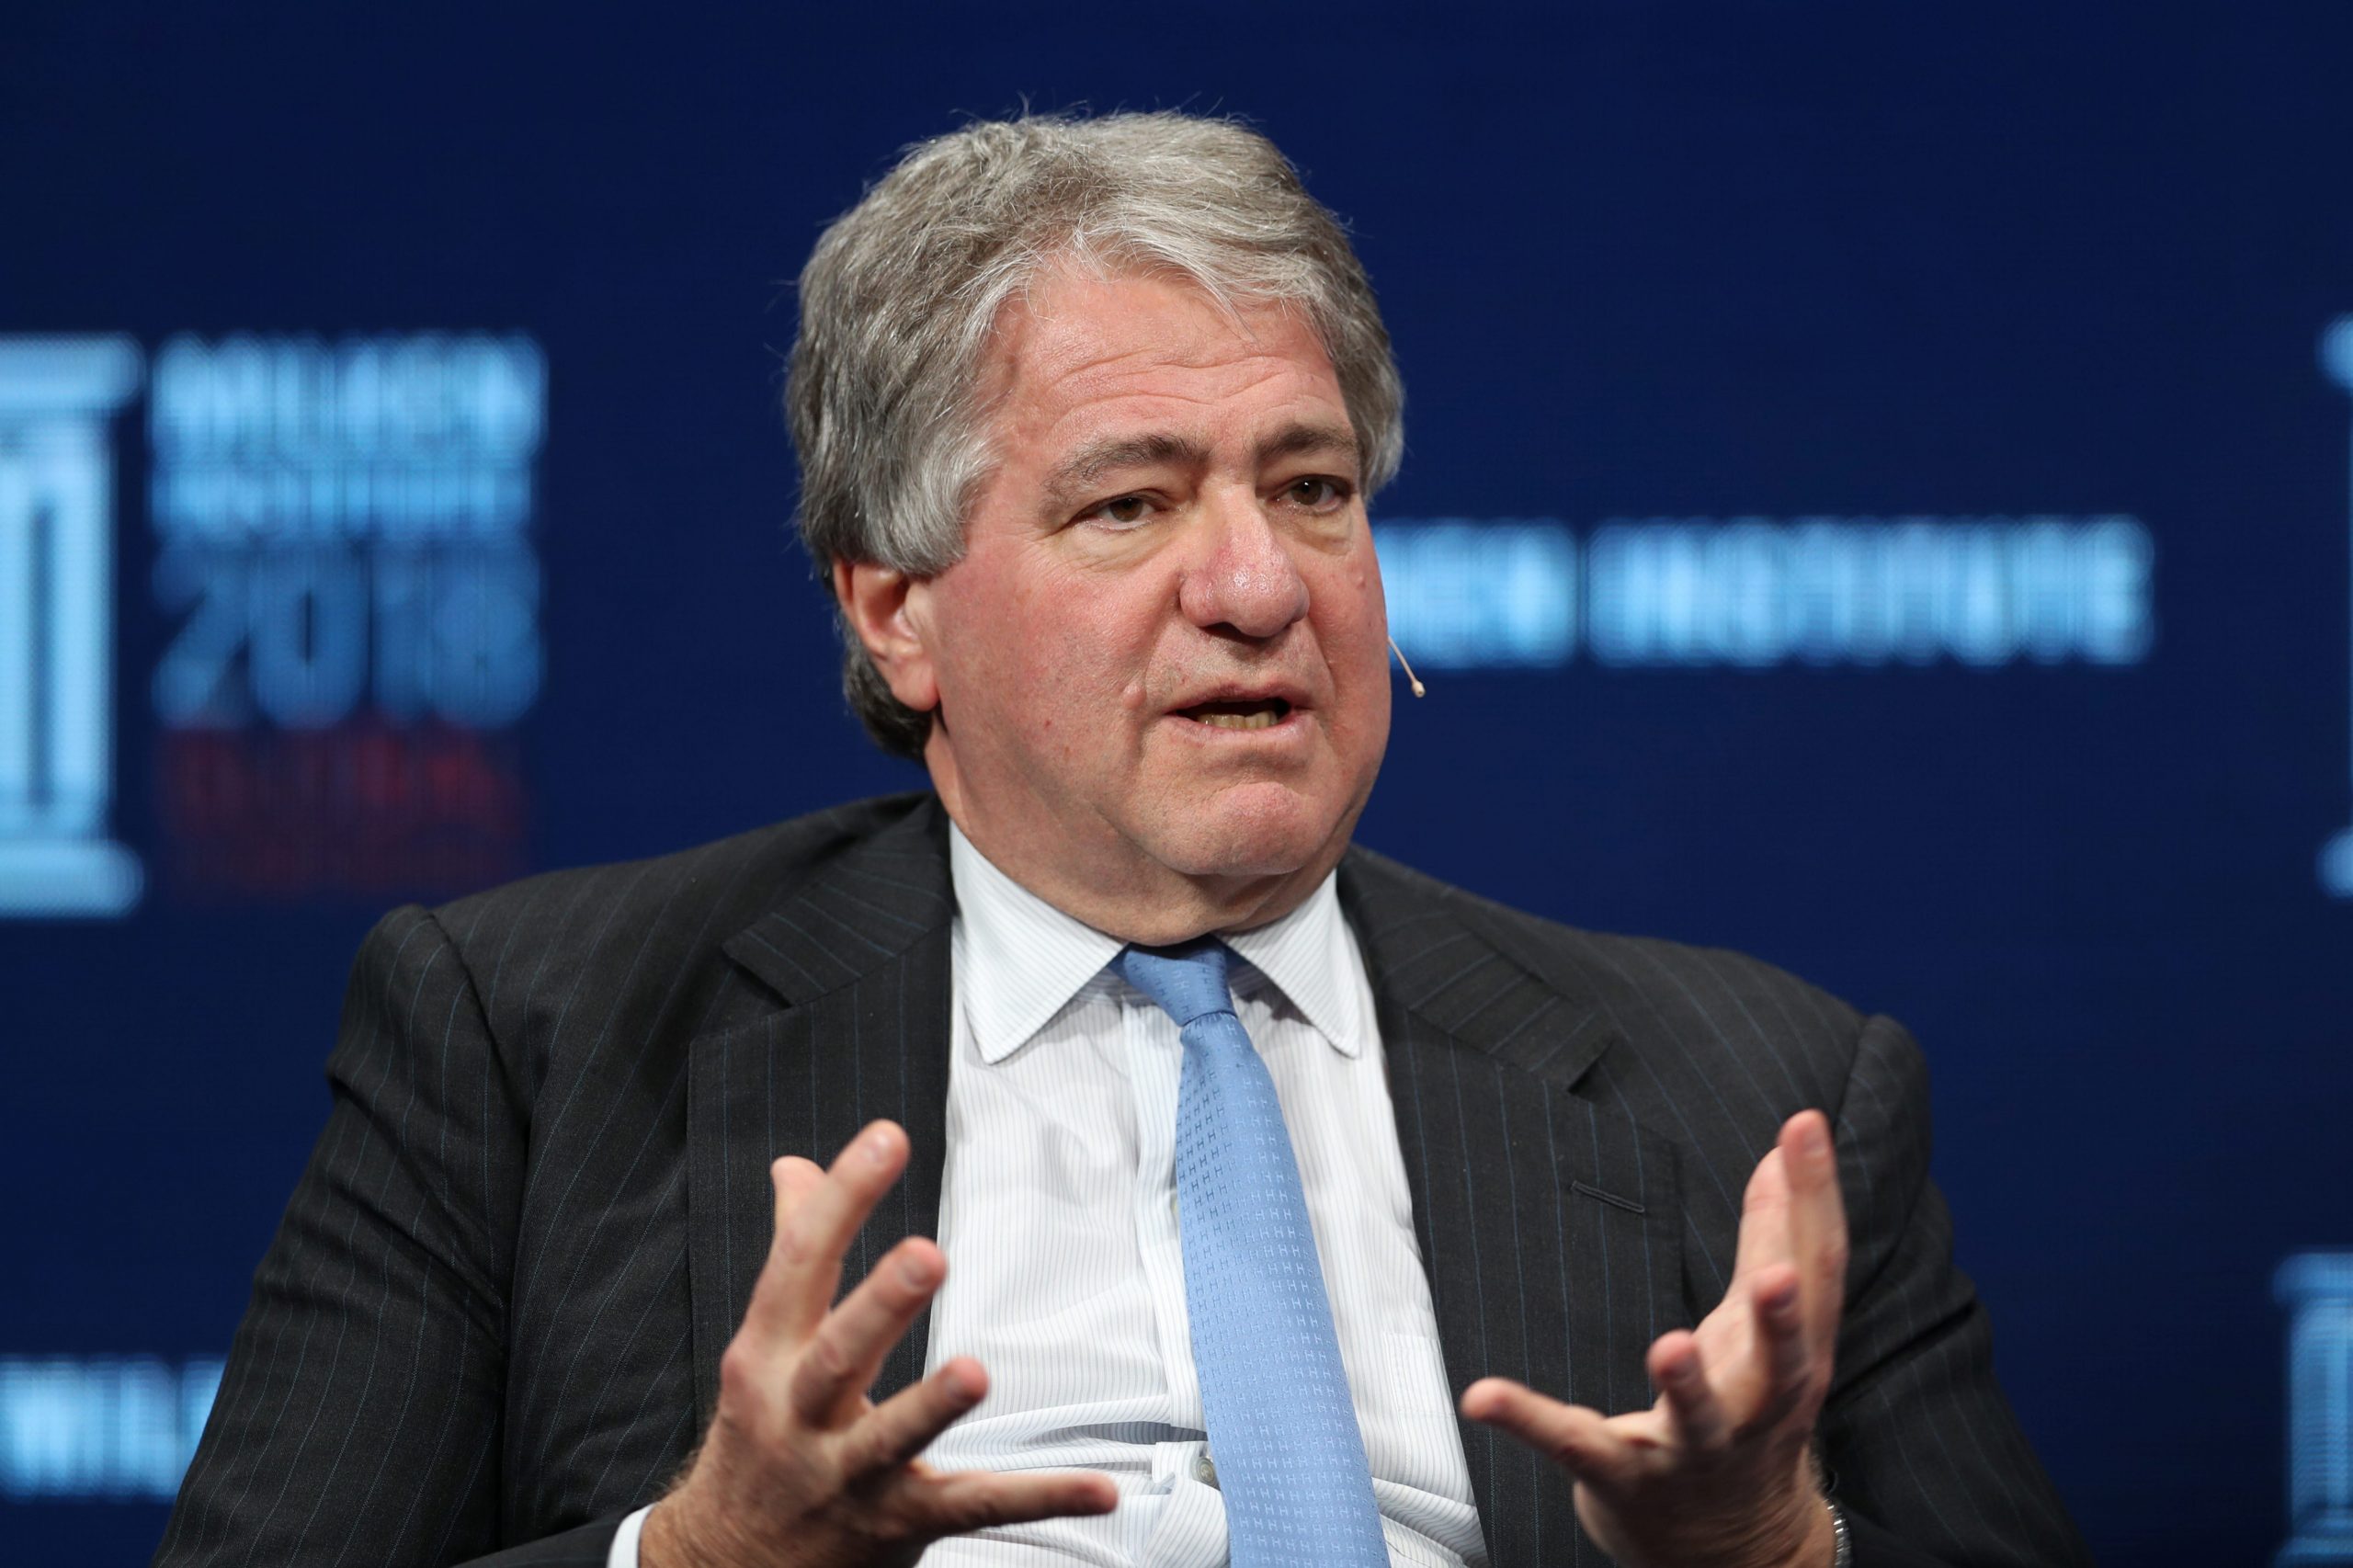 Leon Black wears a dark grey suit, white shirt, and blue tie while speaking on stage.